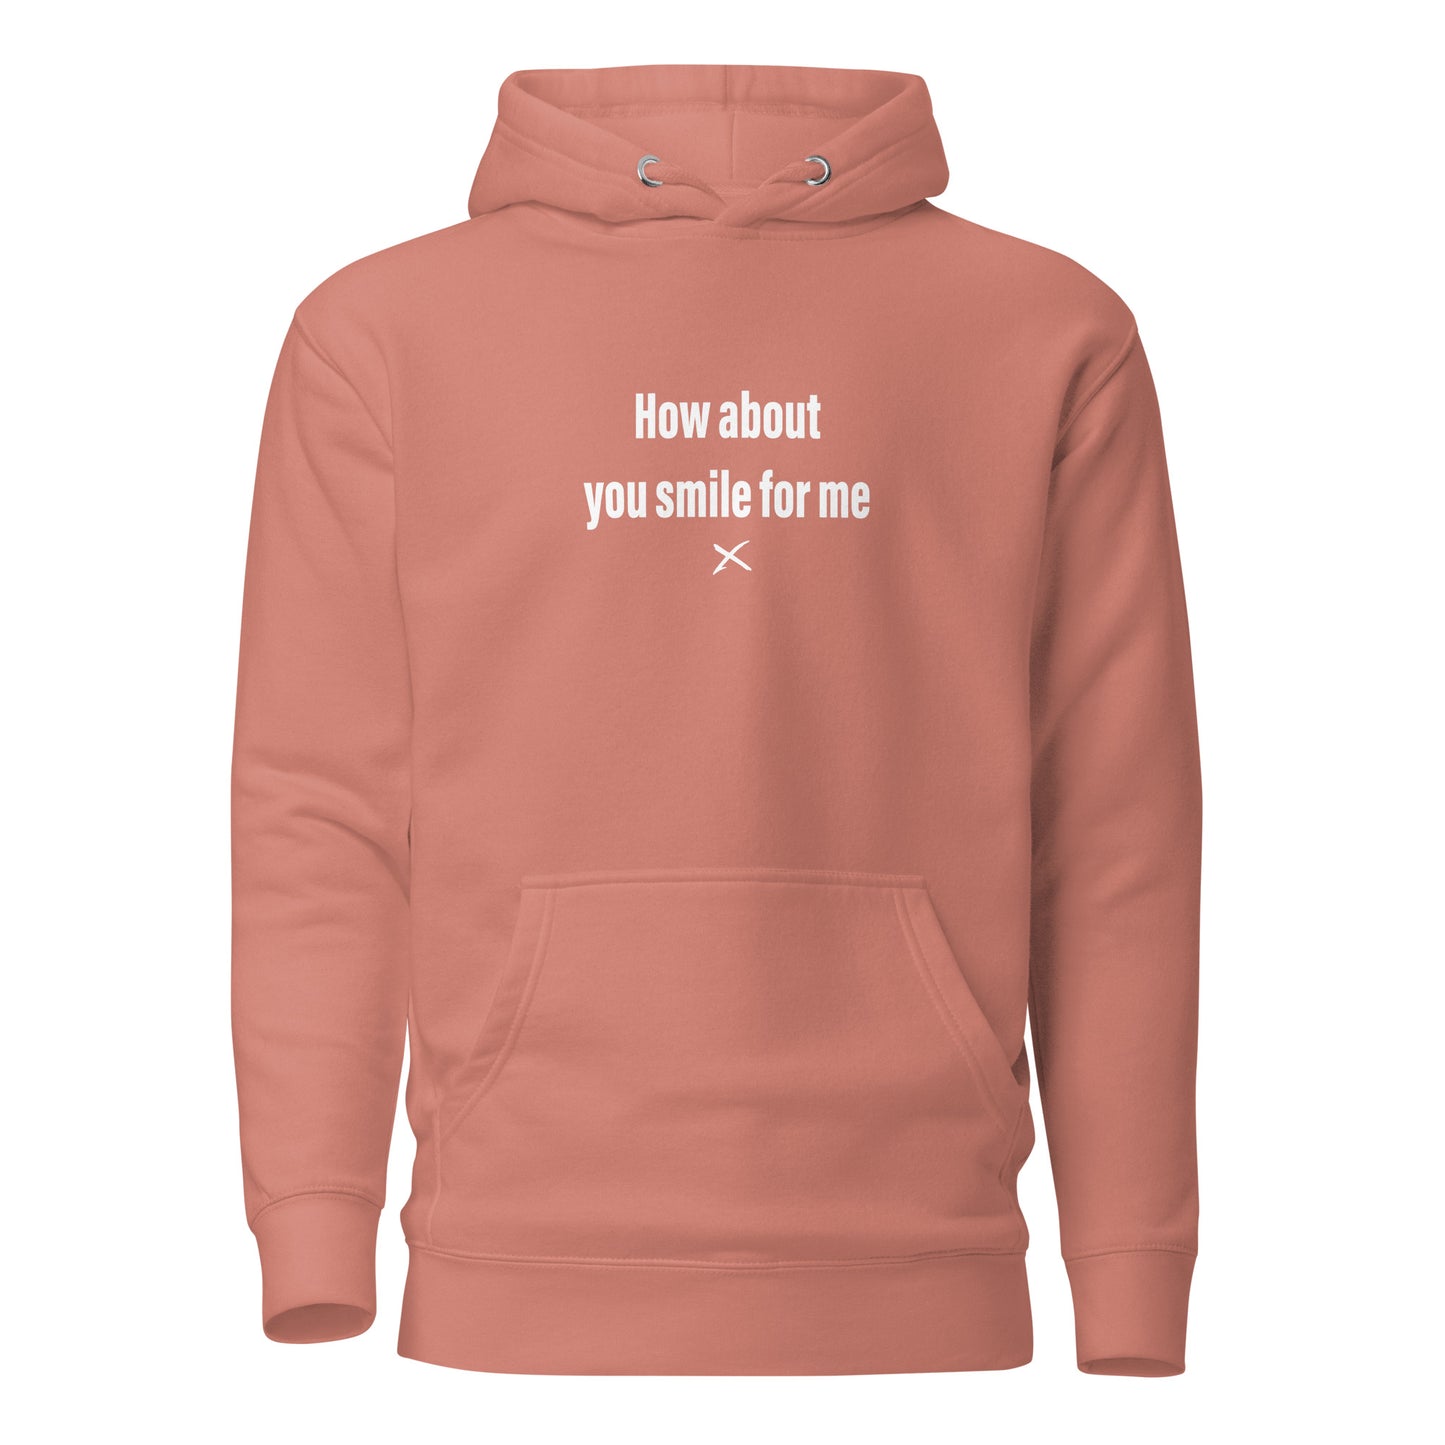 How about you smile for me - Hoodie